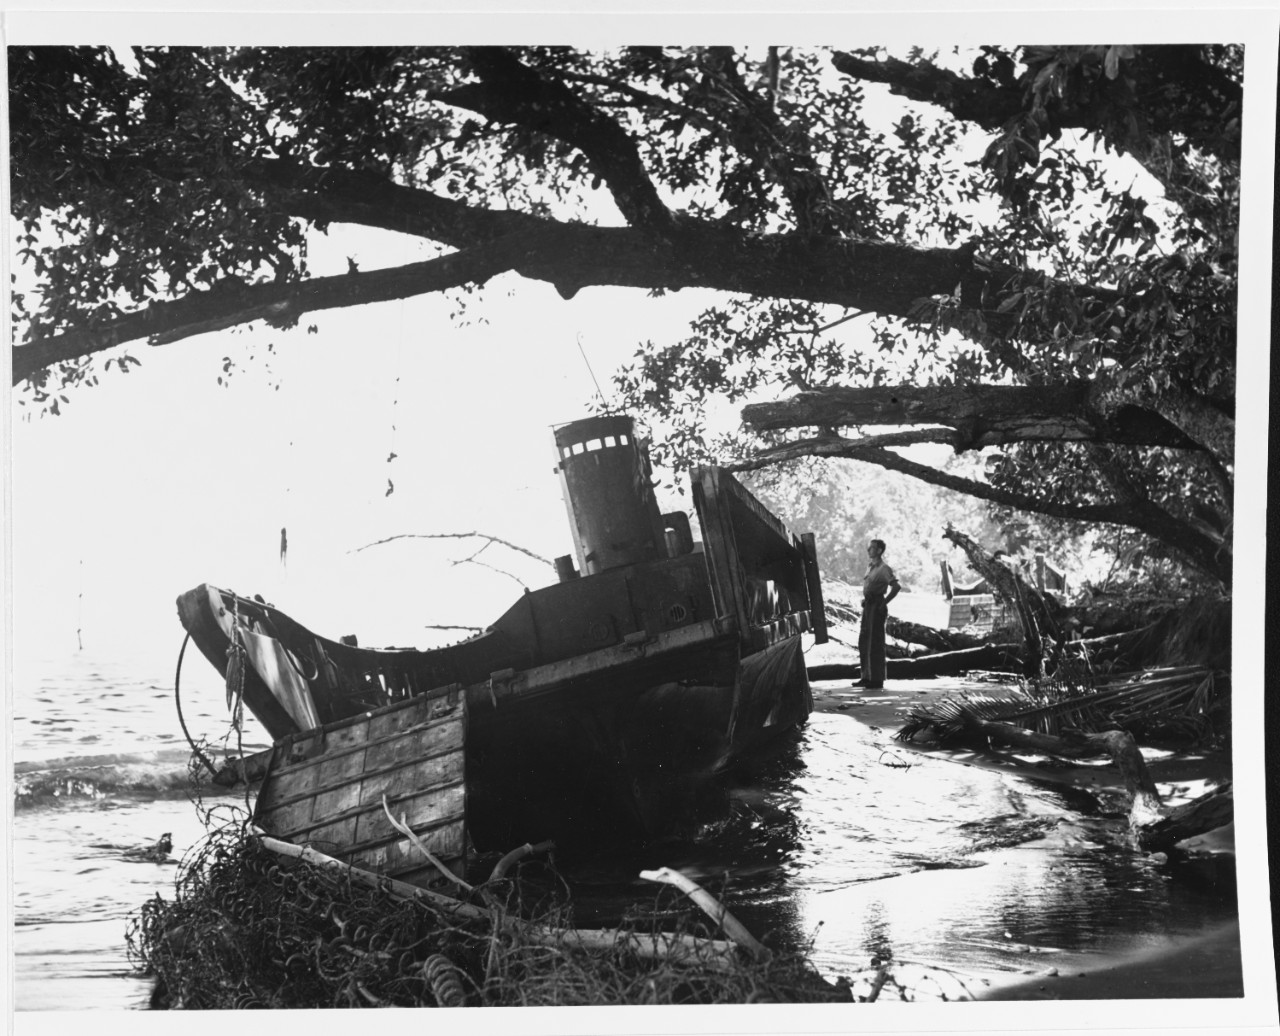 Japanese "Dai Hatsu" Type Landing Craft broached on a Guadalcanal beach, March 23, 1943